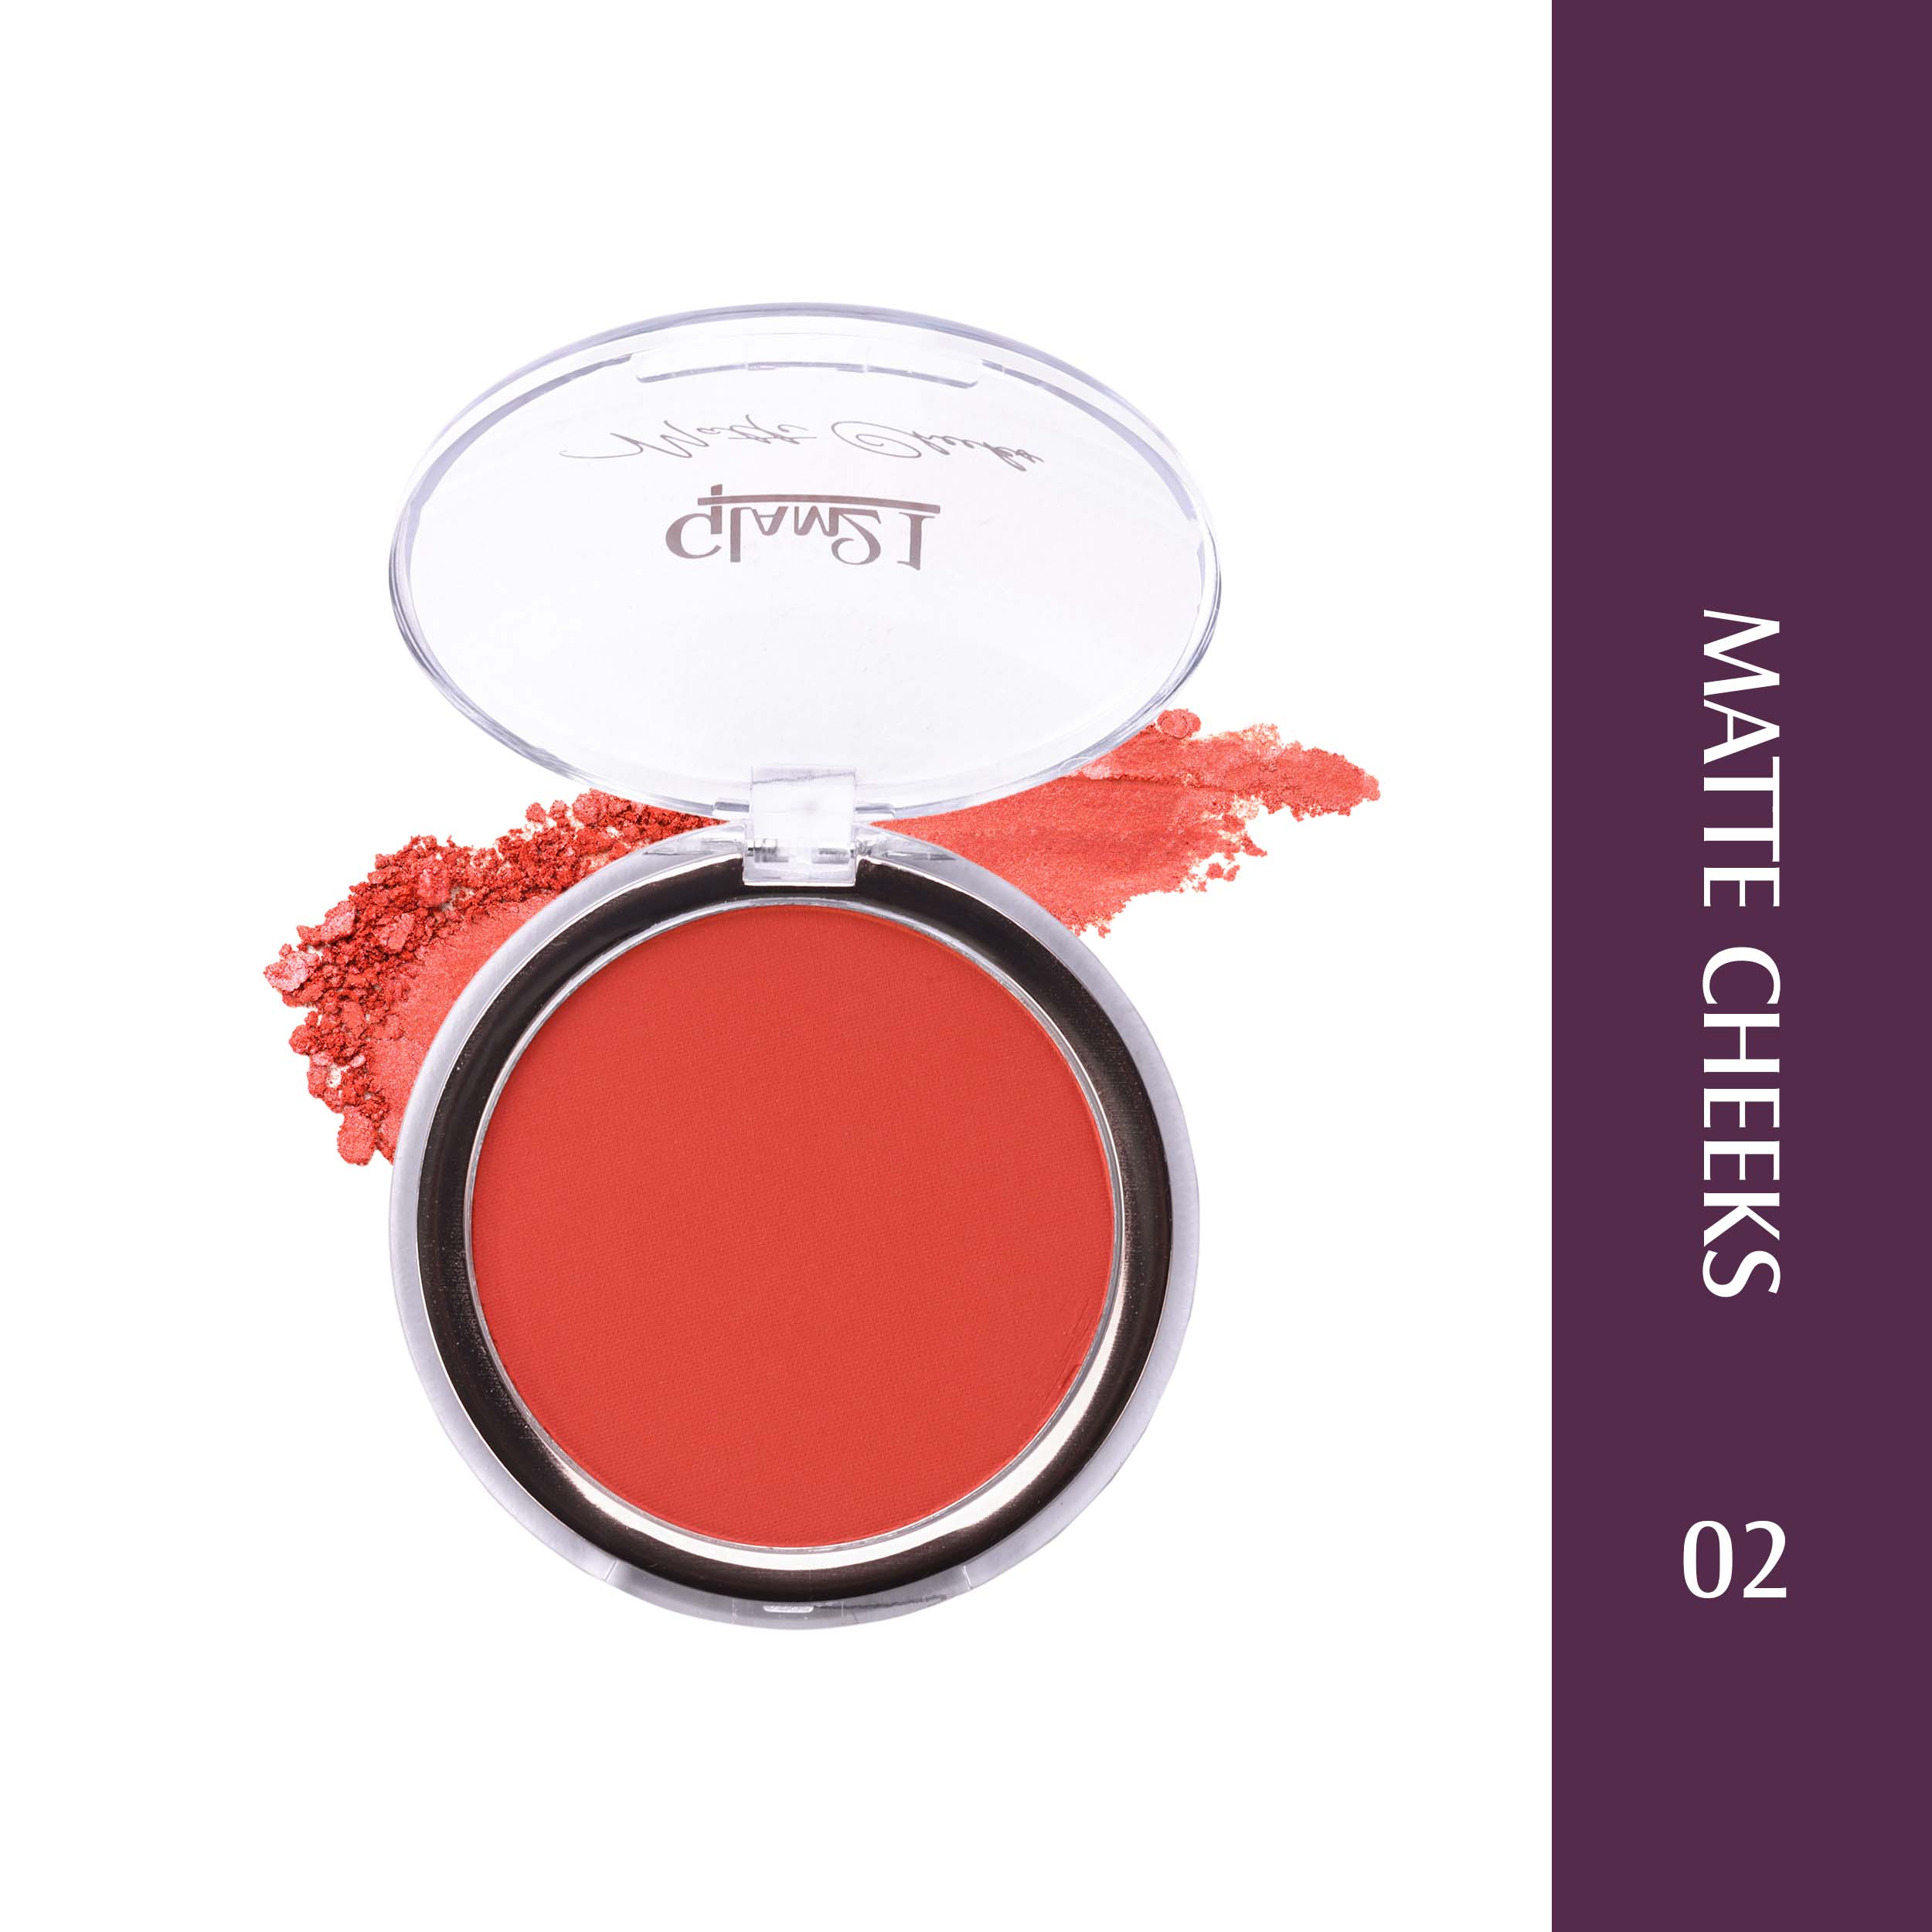 Glam21 Matte Cheek Blush | Perfect Pop of Color | Seamless Texture & Perfect Coverage, 5g  (Shade-02)